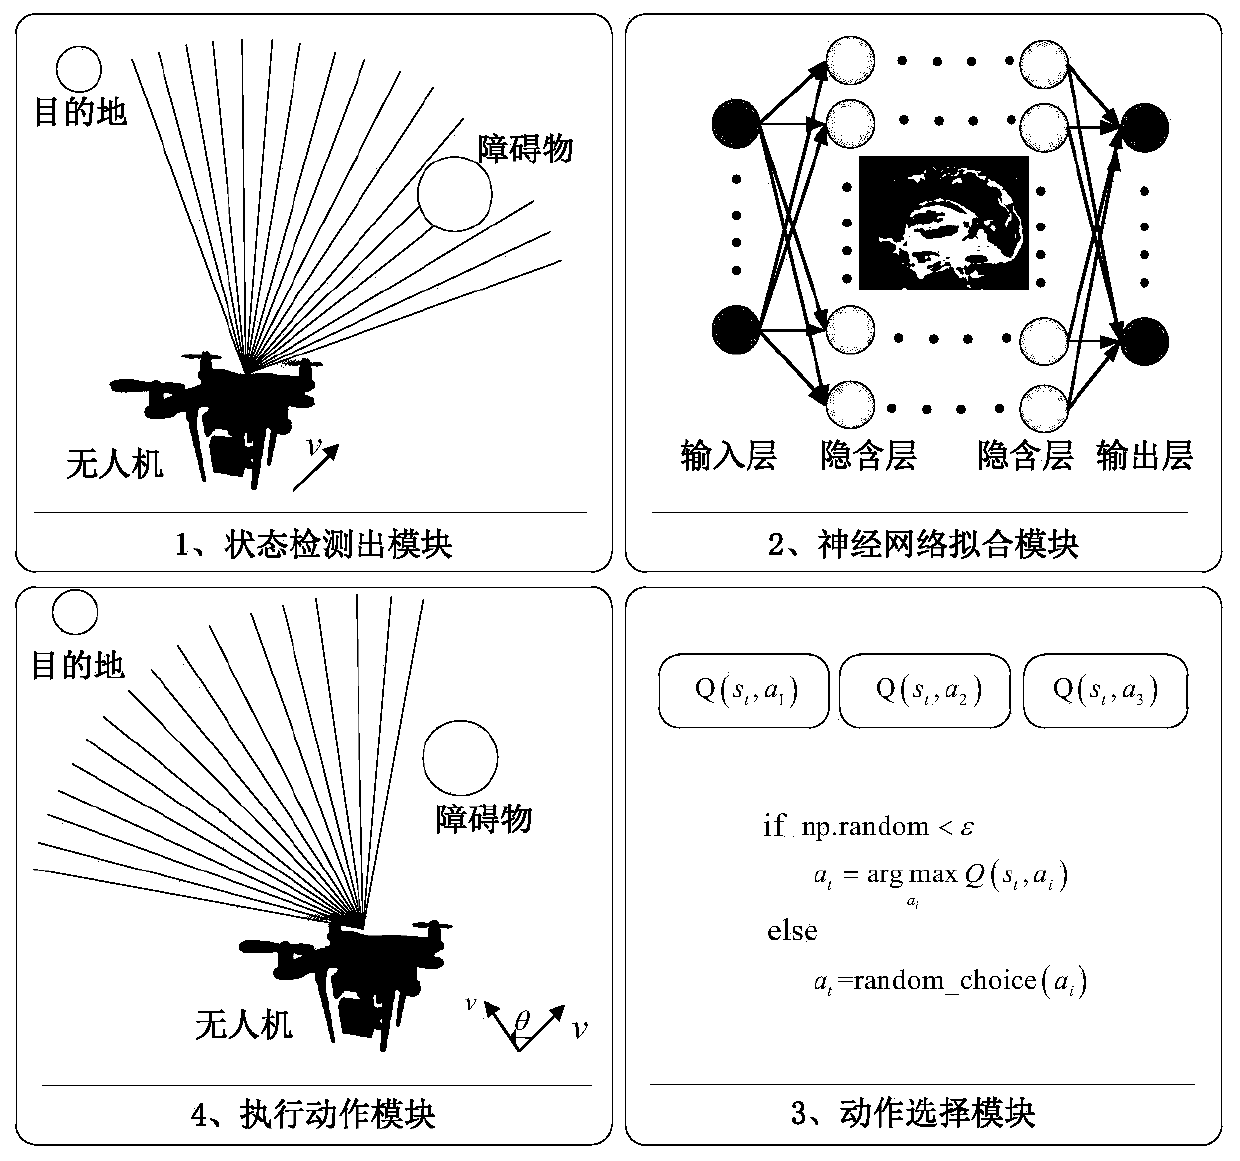 Depth Q learning-based UAV (unmanned aerial vehicle) environment perception and autonomous obstacle avoidance method